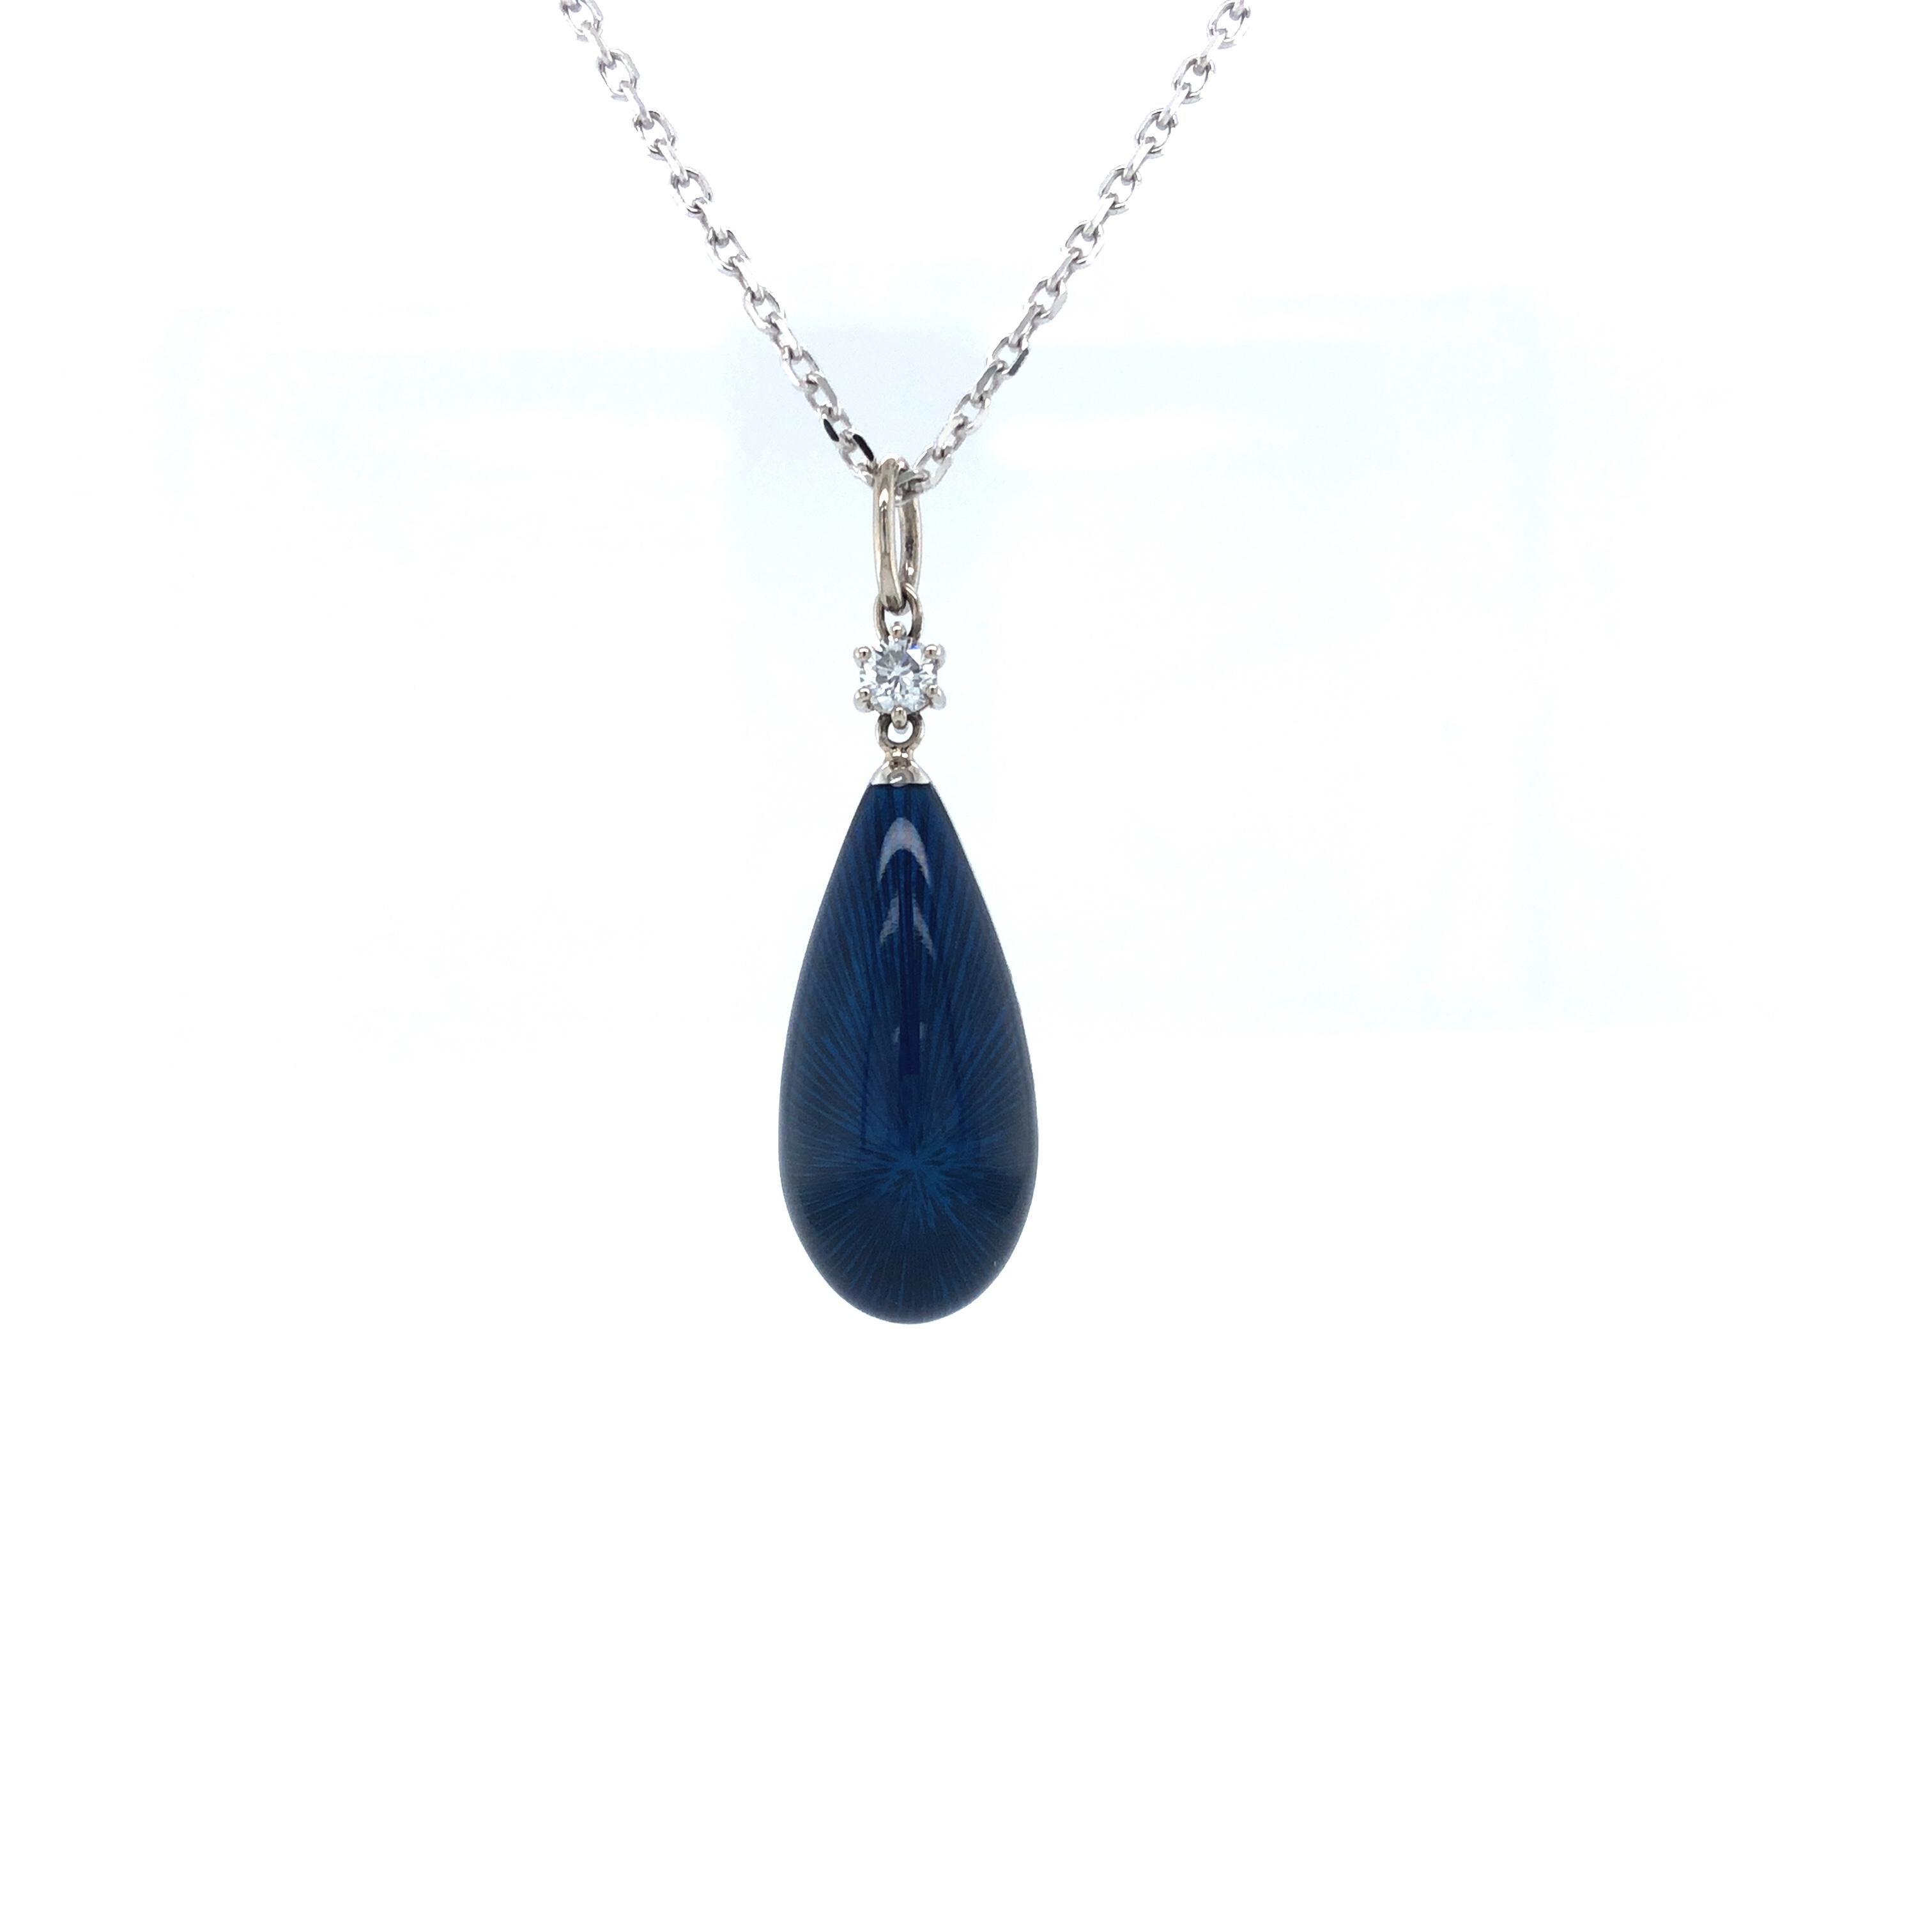 Drop pendant necklace, Dew Drop collection by Victor Mayer, 18k white gold, petrol blue vitreous enamel, 1 diamond total 0.09 ct, G VS brilliant cut, Measurements app. 30.0 mm x 10.0 mm

About the creator Victor Mayer
Victor Mayer is internationally